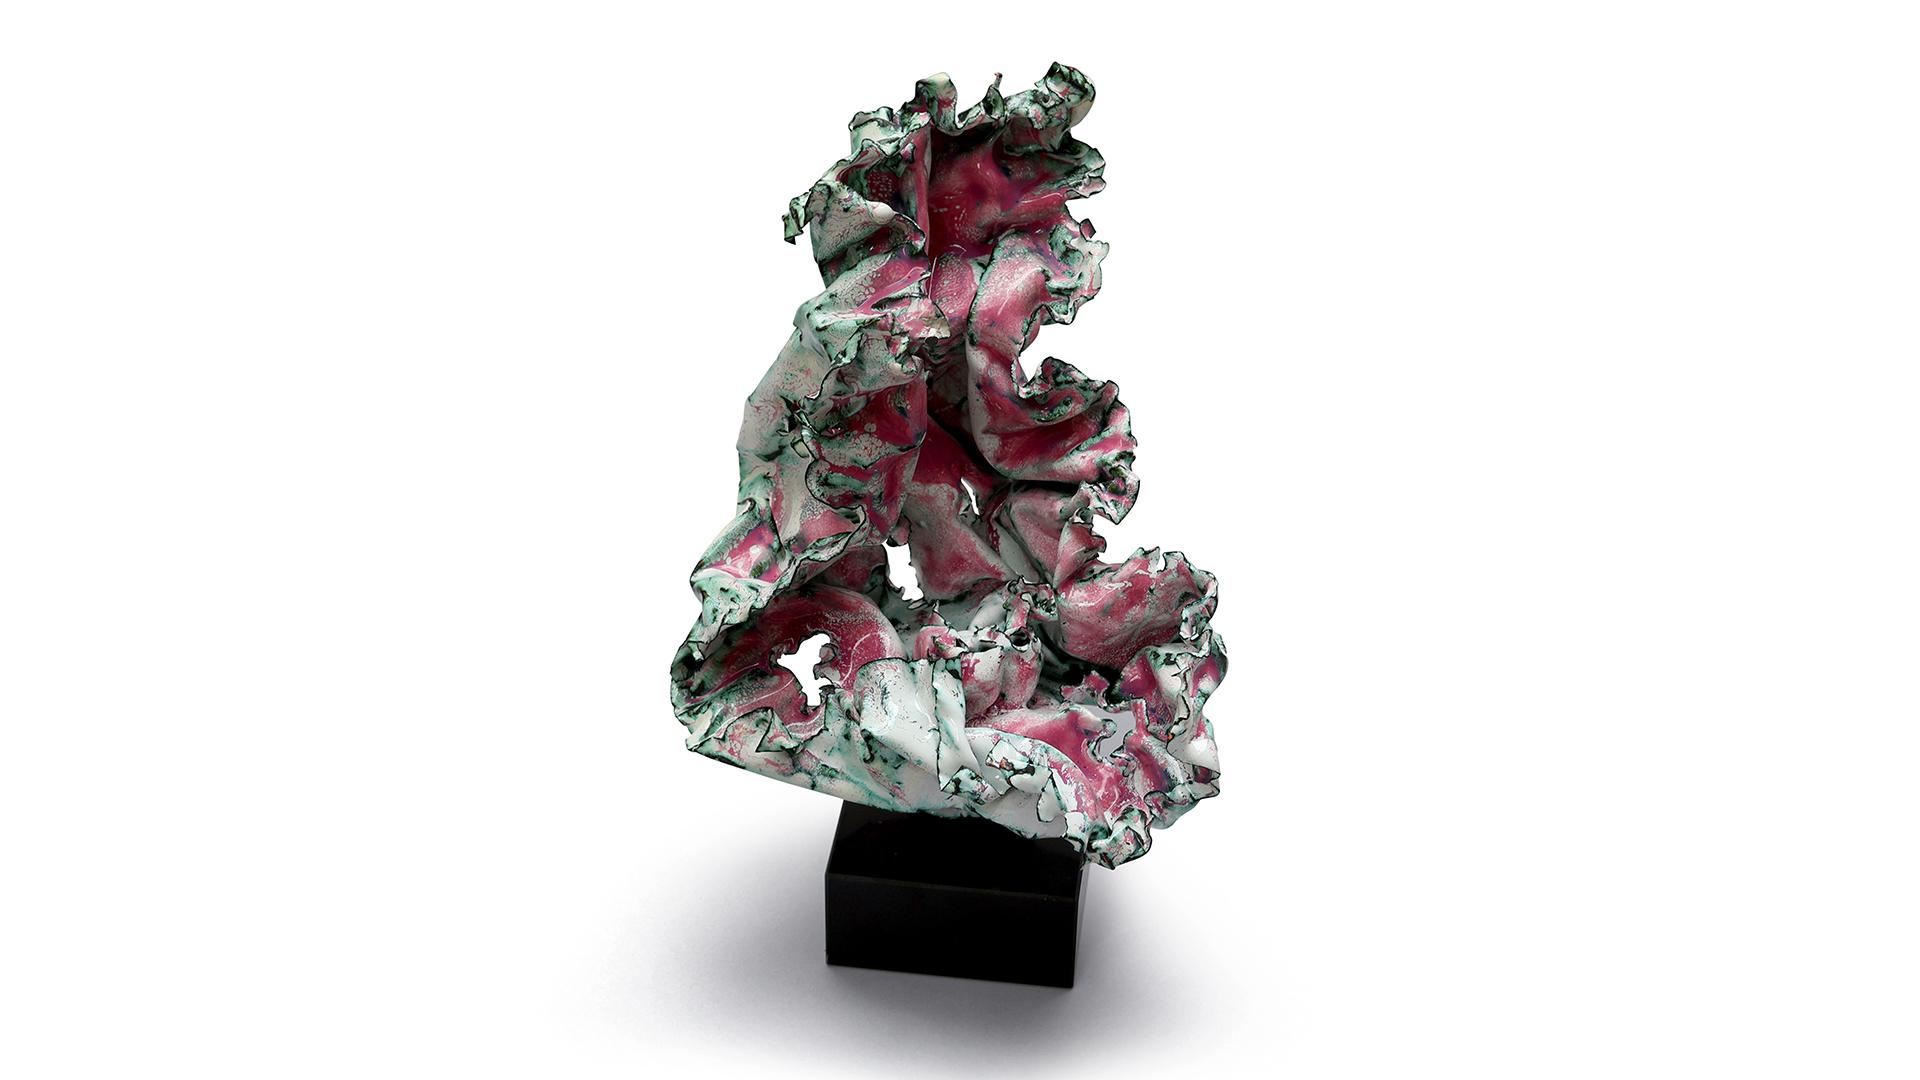 Enameled white and pink Sculpture by sherry been